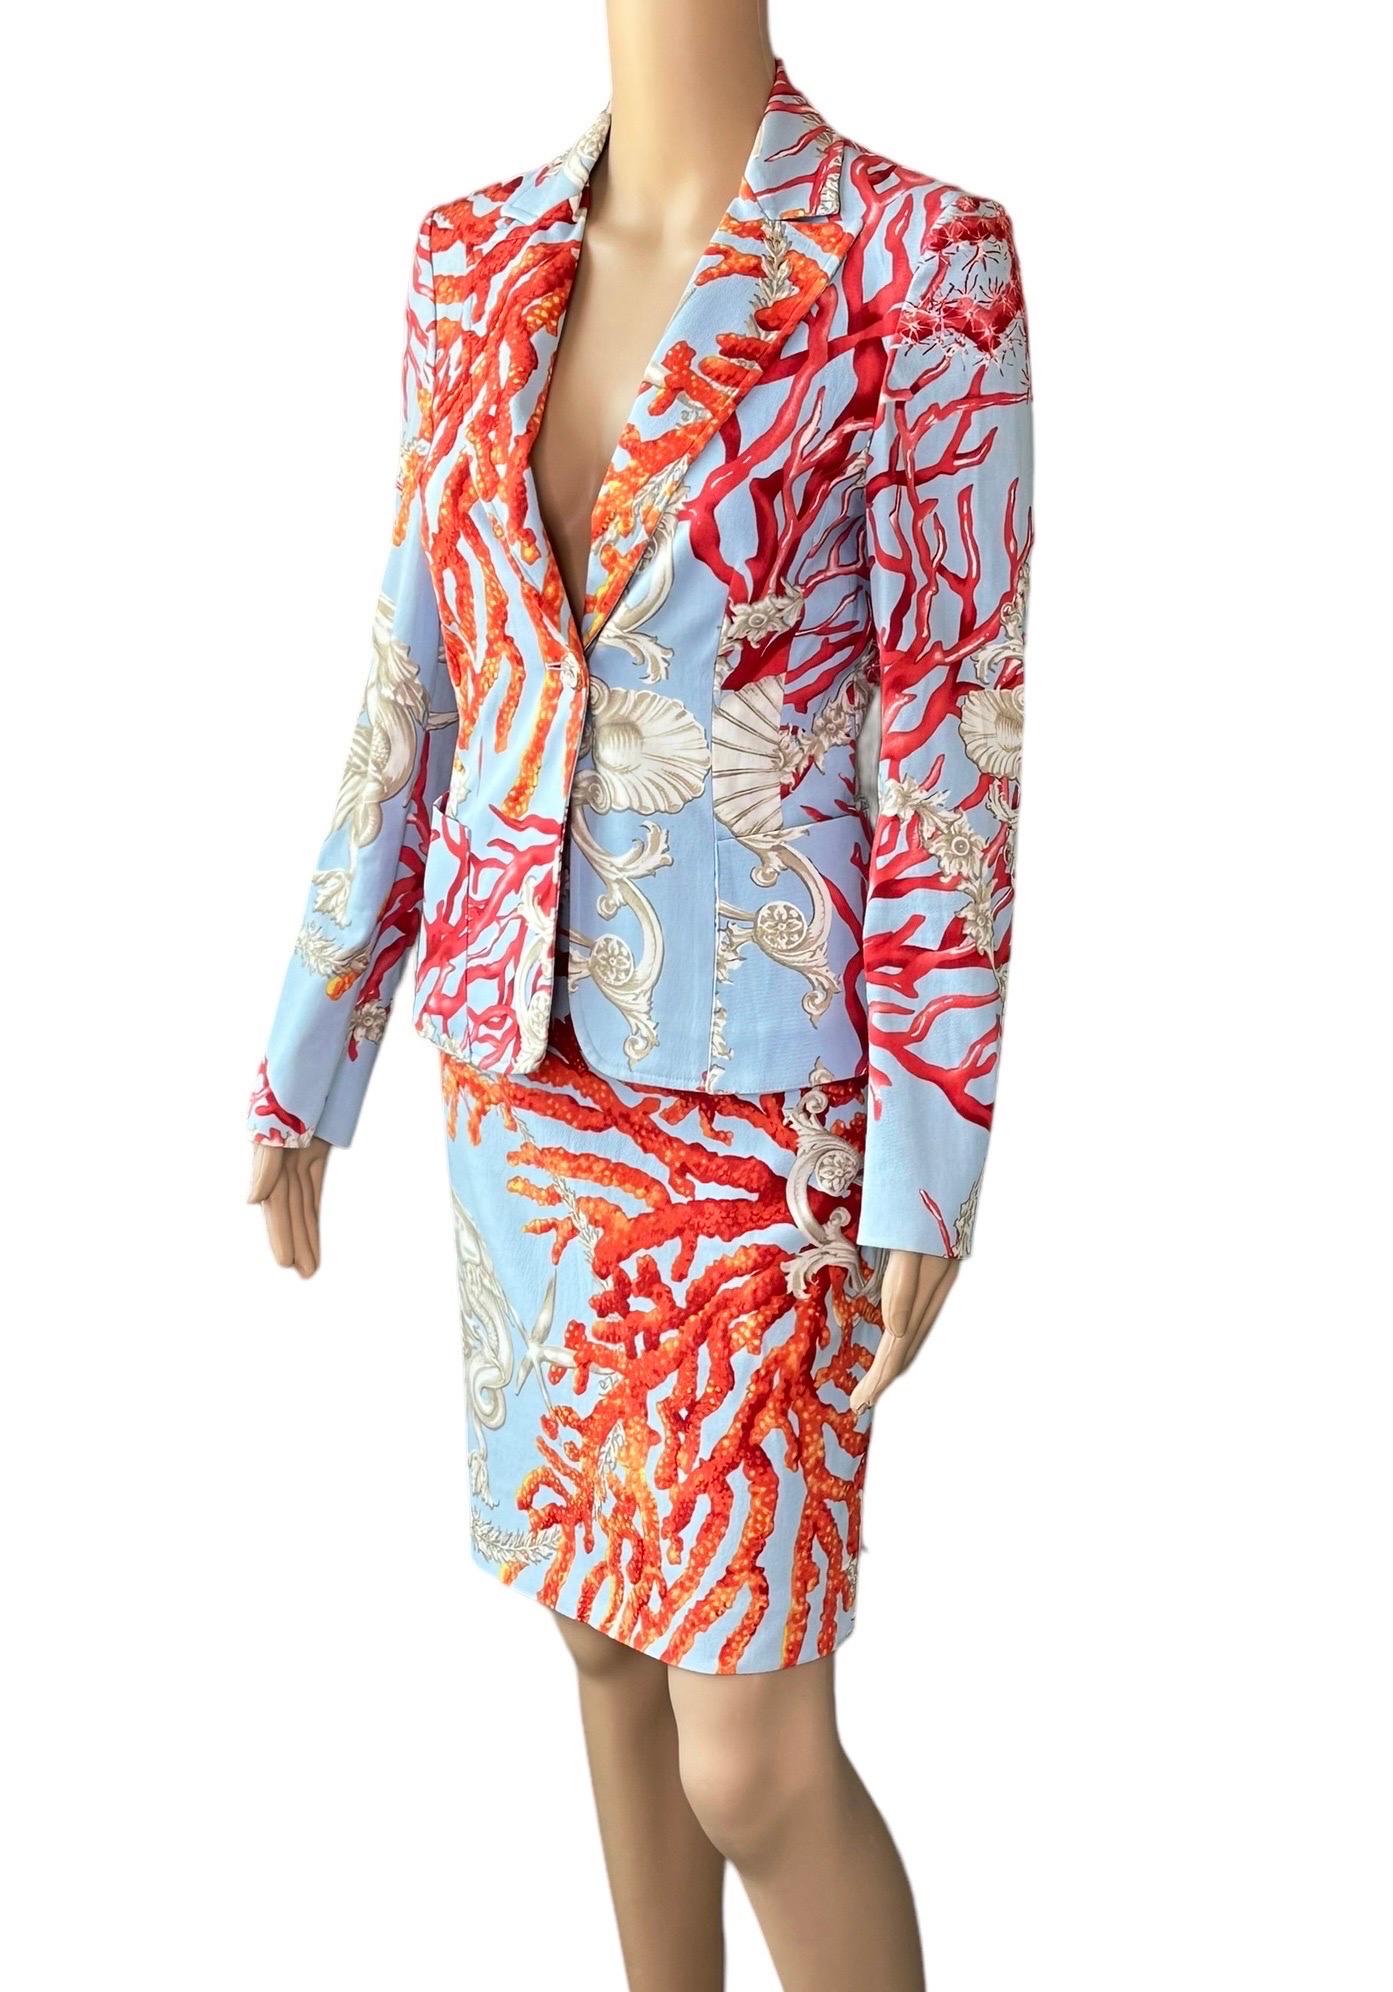 Versace S/S 2005 Blazer Jacket Top & Skirt 2 Piece Set Ensemble

Condition: Excellent condition. Please note jacket is size IT 38 while the skirt is size IT 44. The skirt can be easily adjusted by a professional tailor. 